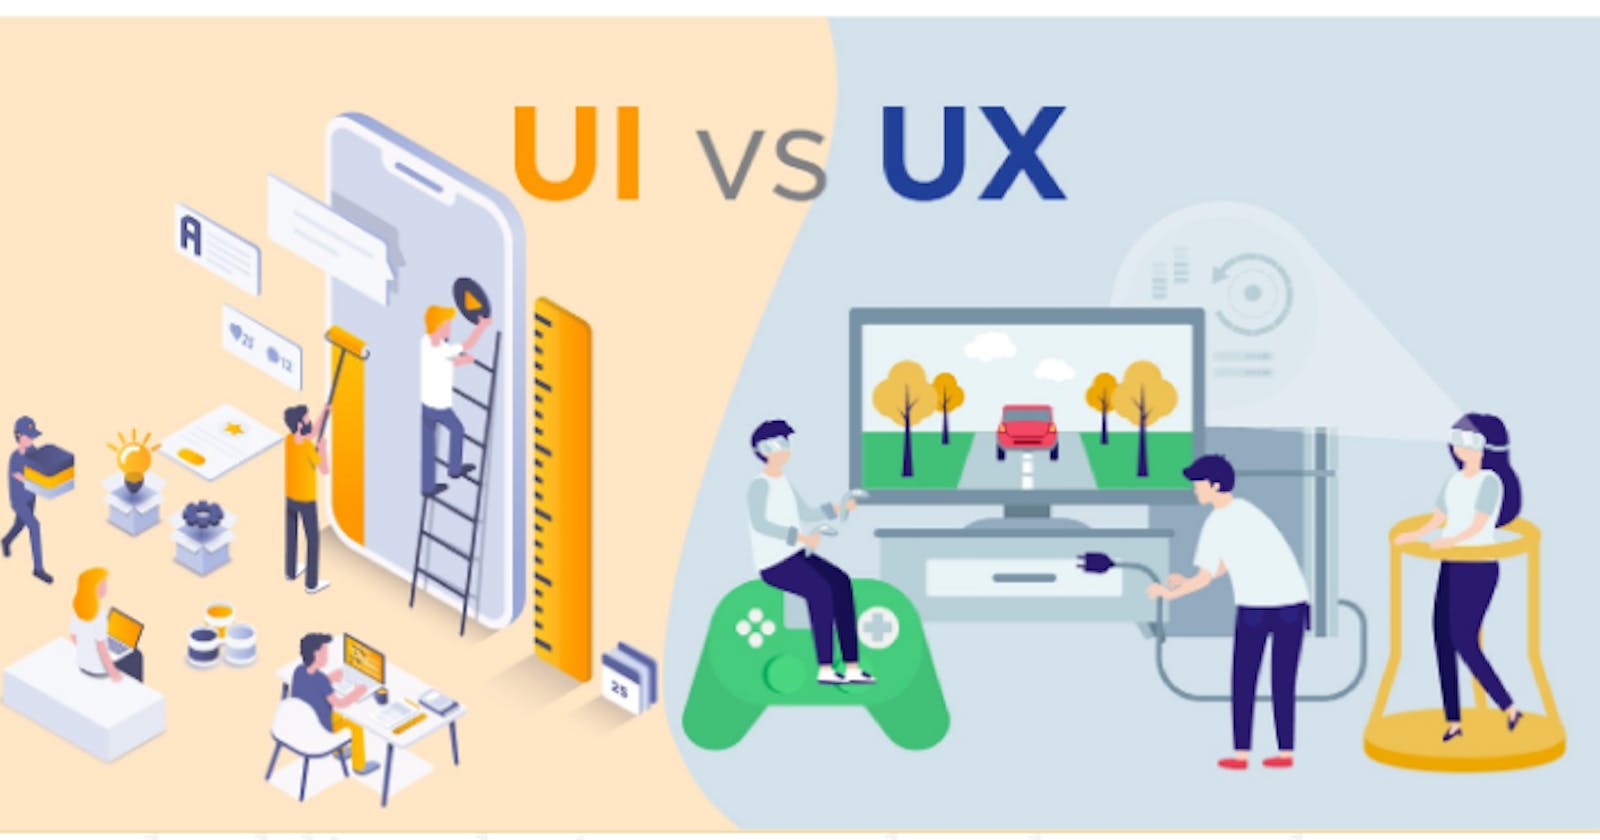 THE DIFFERENCE BETWEEN UI AND UX DESIGN